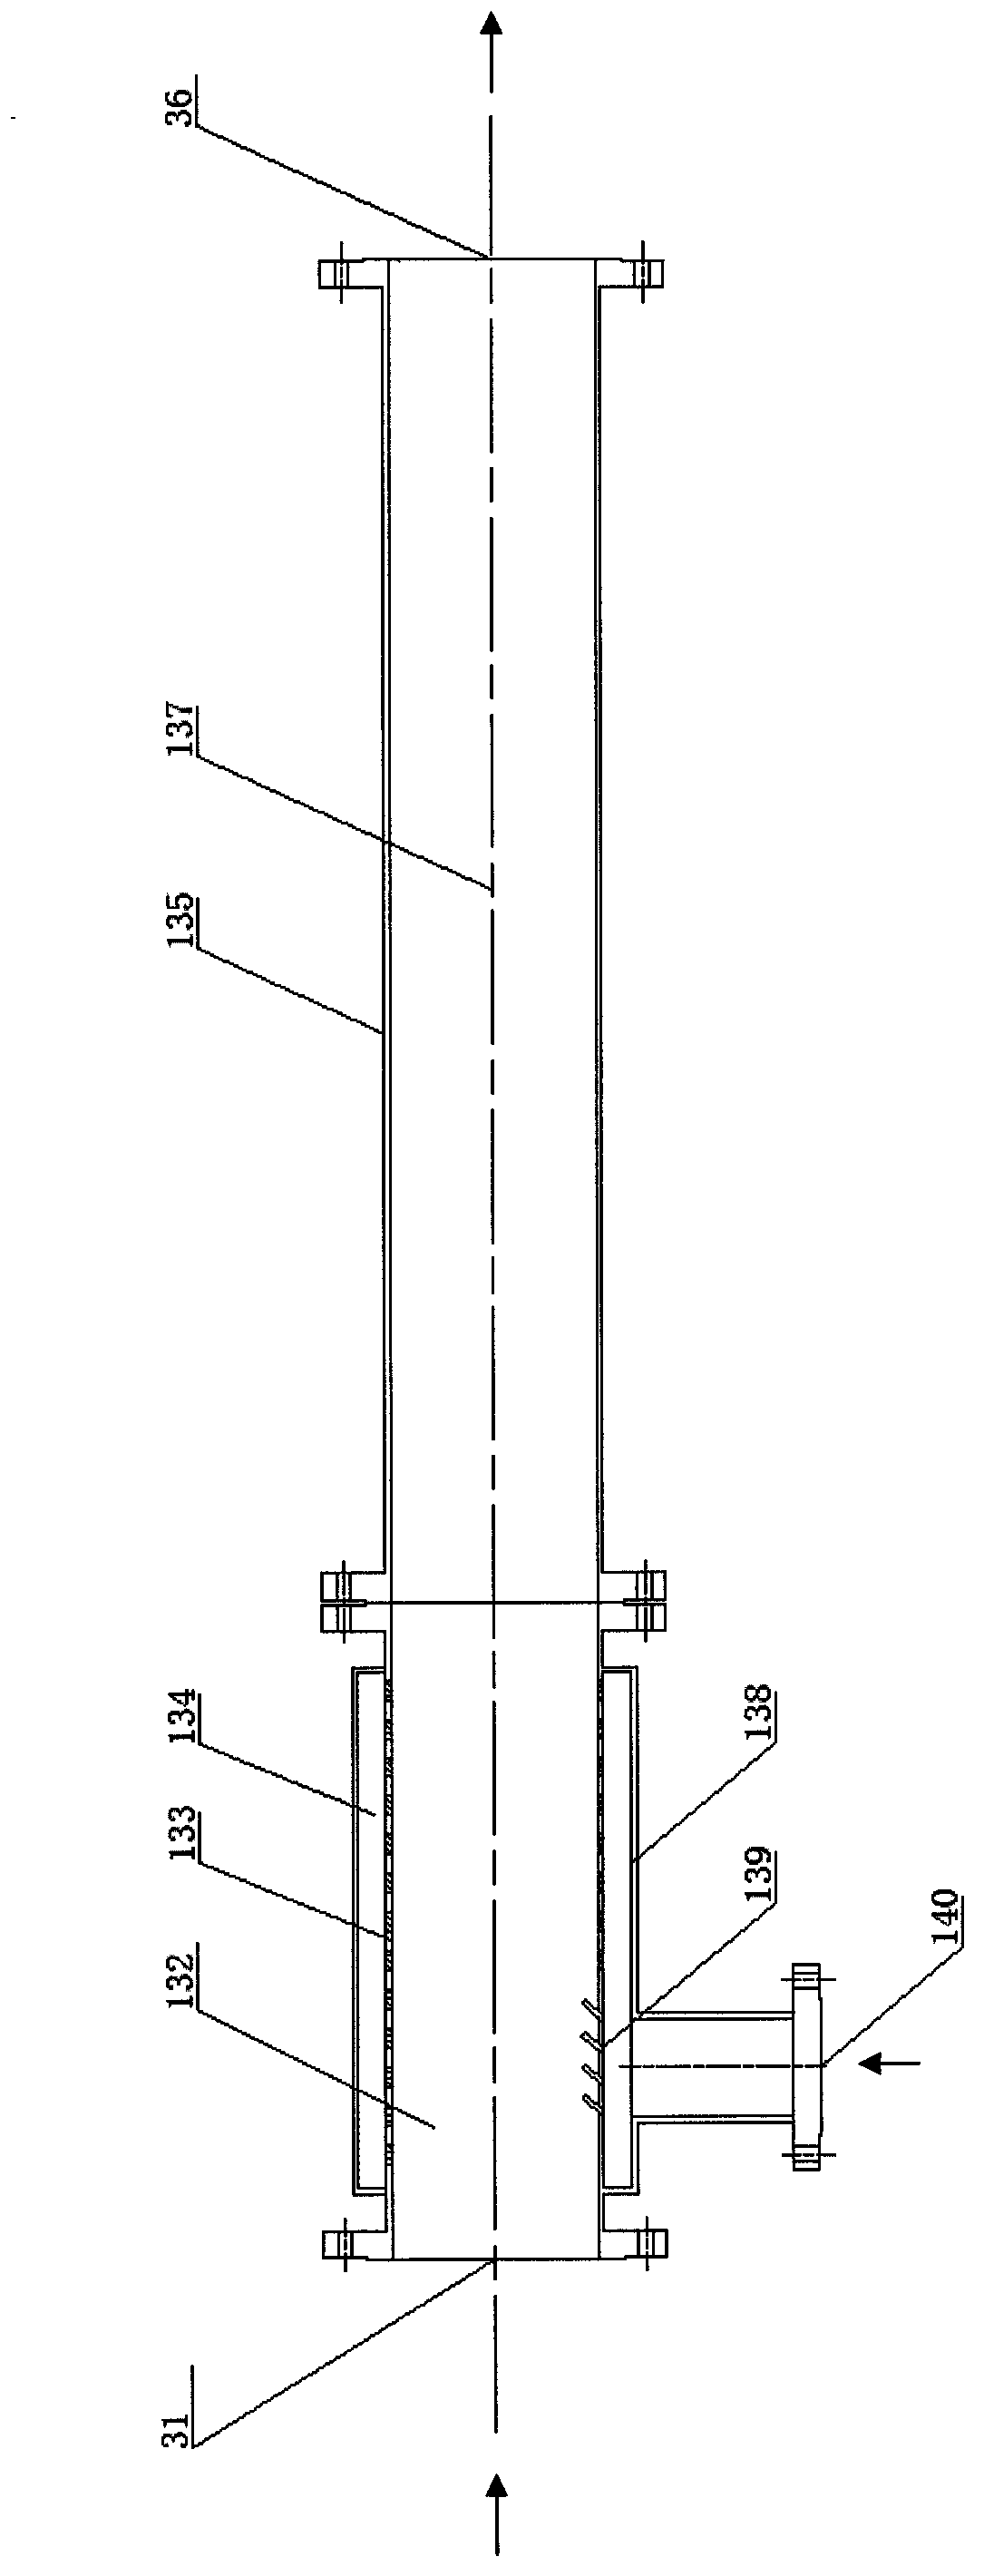 Device and method for realizing continuous pyrohydrolysis treatment of organic material